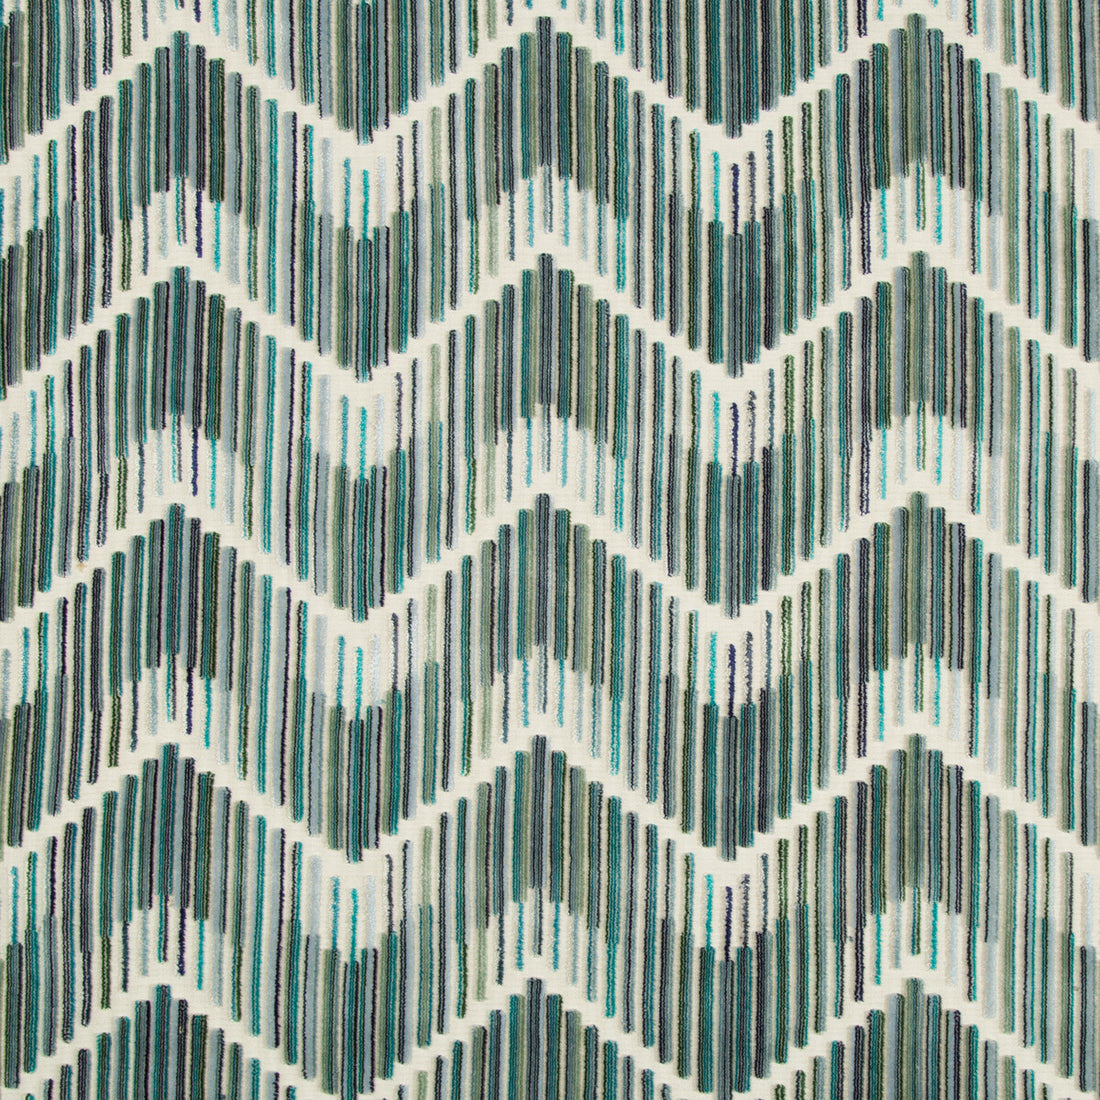 Highs And Lows fabric in peacock color - pattern 34553.5.0 - by Kravet Couture in the Artisan Velvets collection